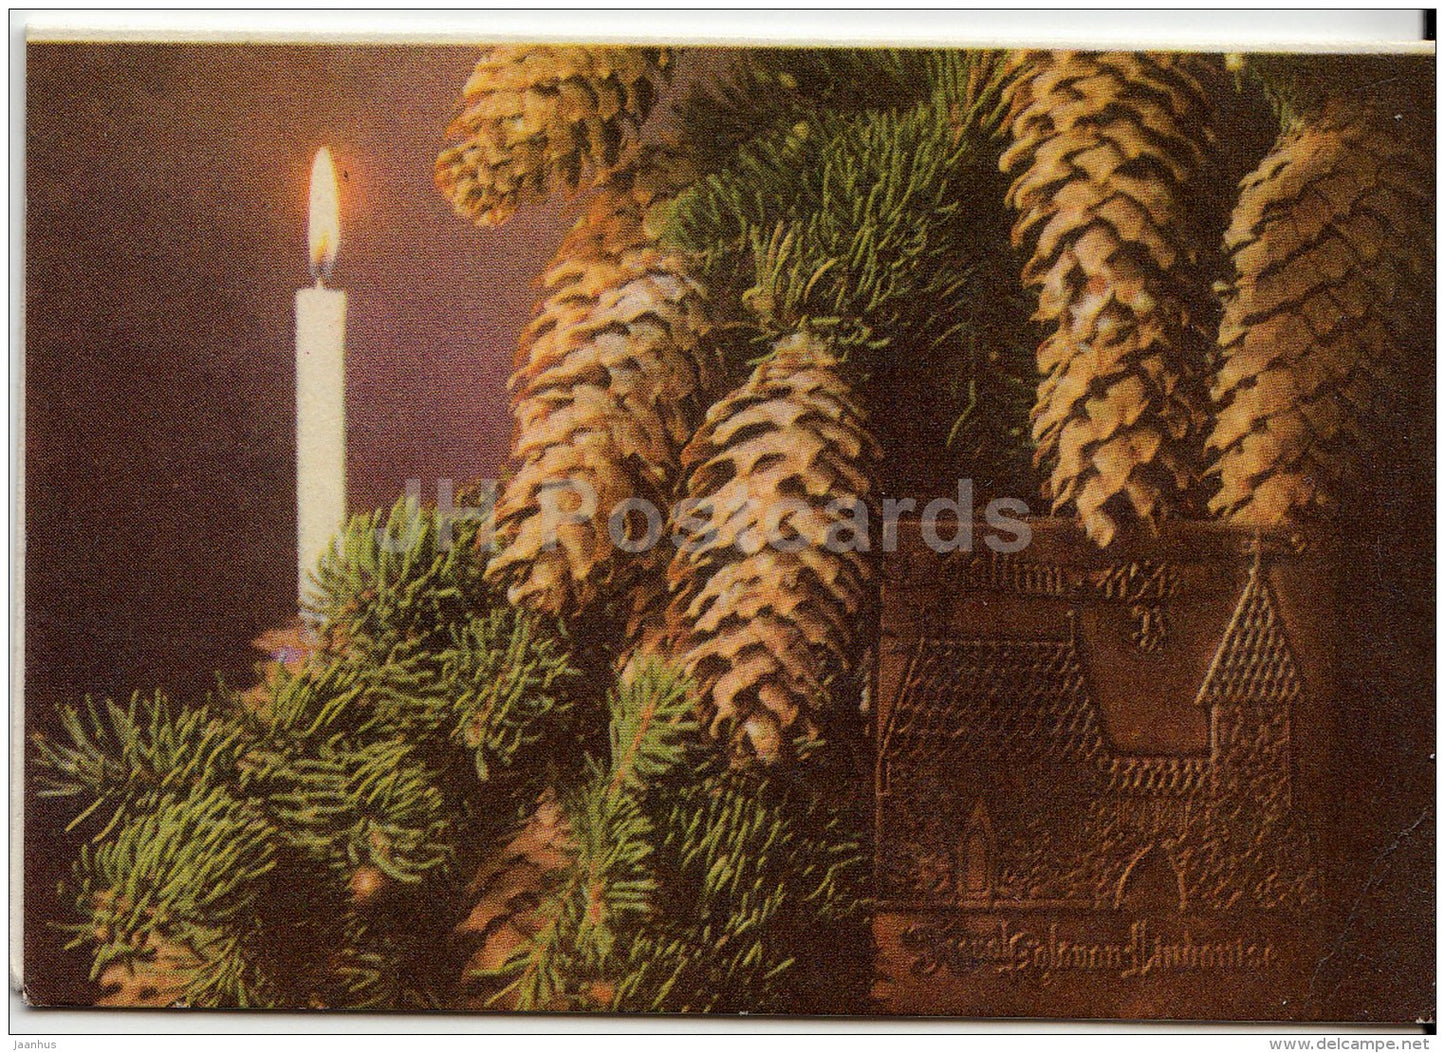 mini New Year greeting card - candle - fir cones - 1971 - Estonia USSR - unused - JH Postcards